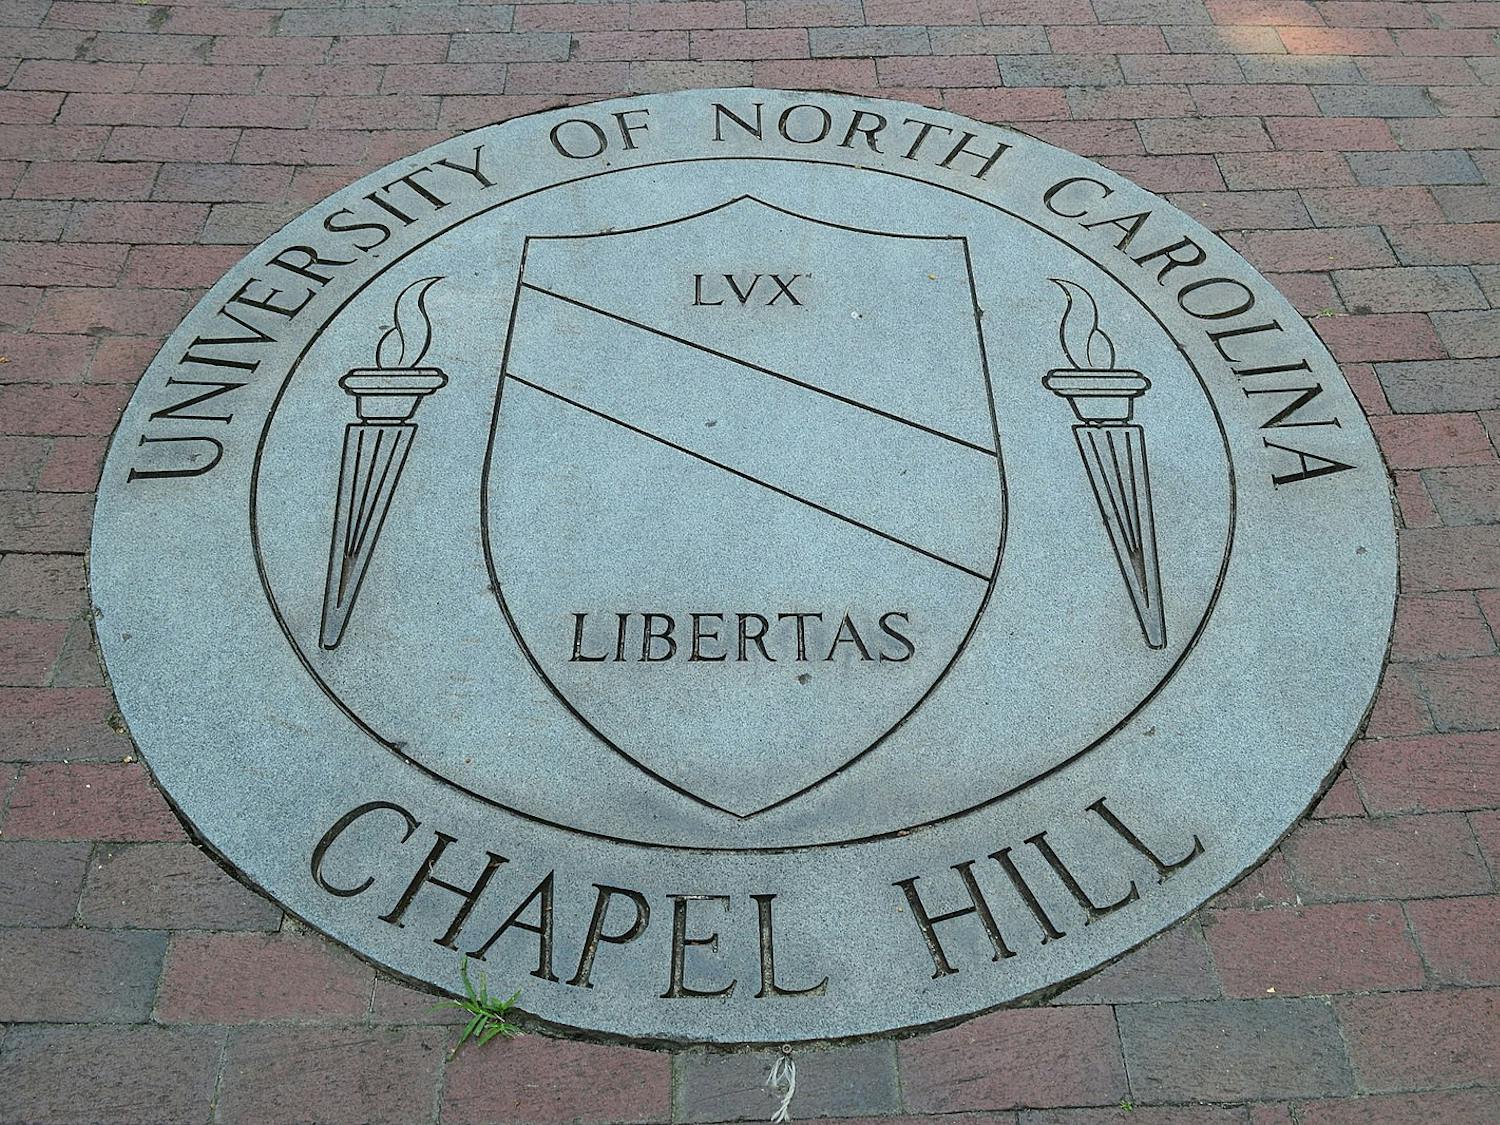 A graduate student has been charged with first-degree murder after fatally shooting his faculty advisor at the University of North Carolina-Chapel Hill (Photo courtesy of Wikimedia Commons/“University Of North Carolina At Chapel Hill School Seal” by William Yeung. August 4, 2013). 